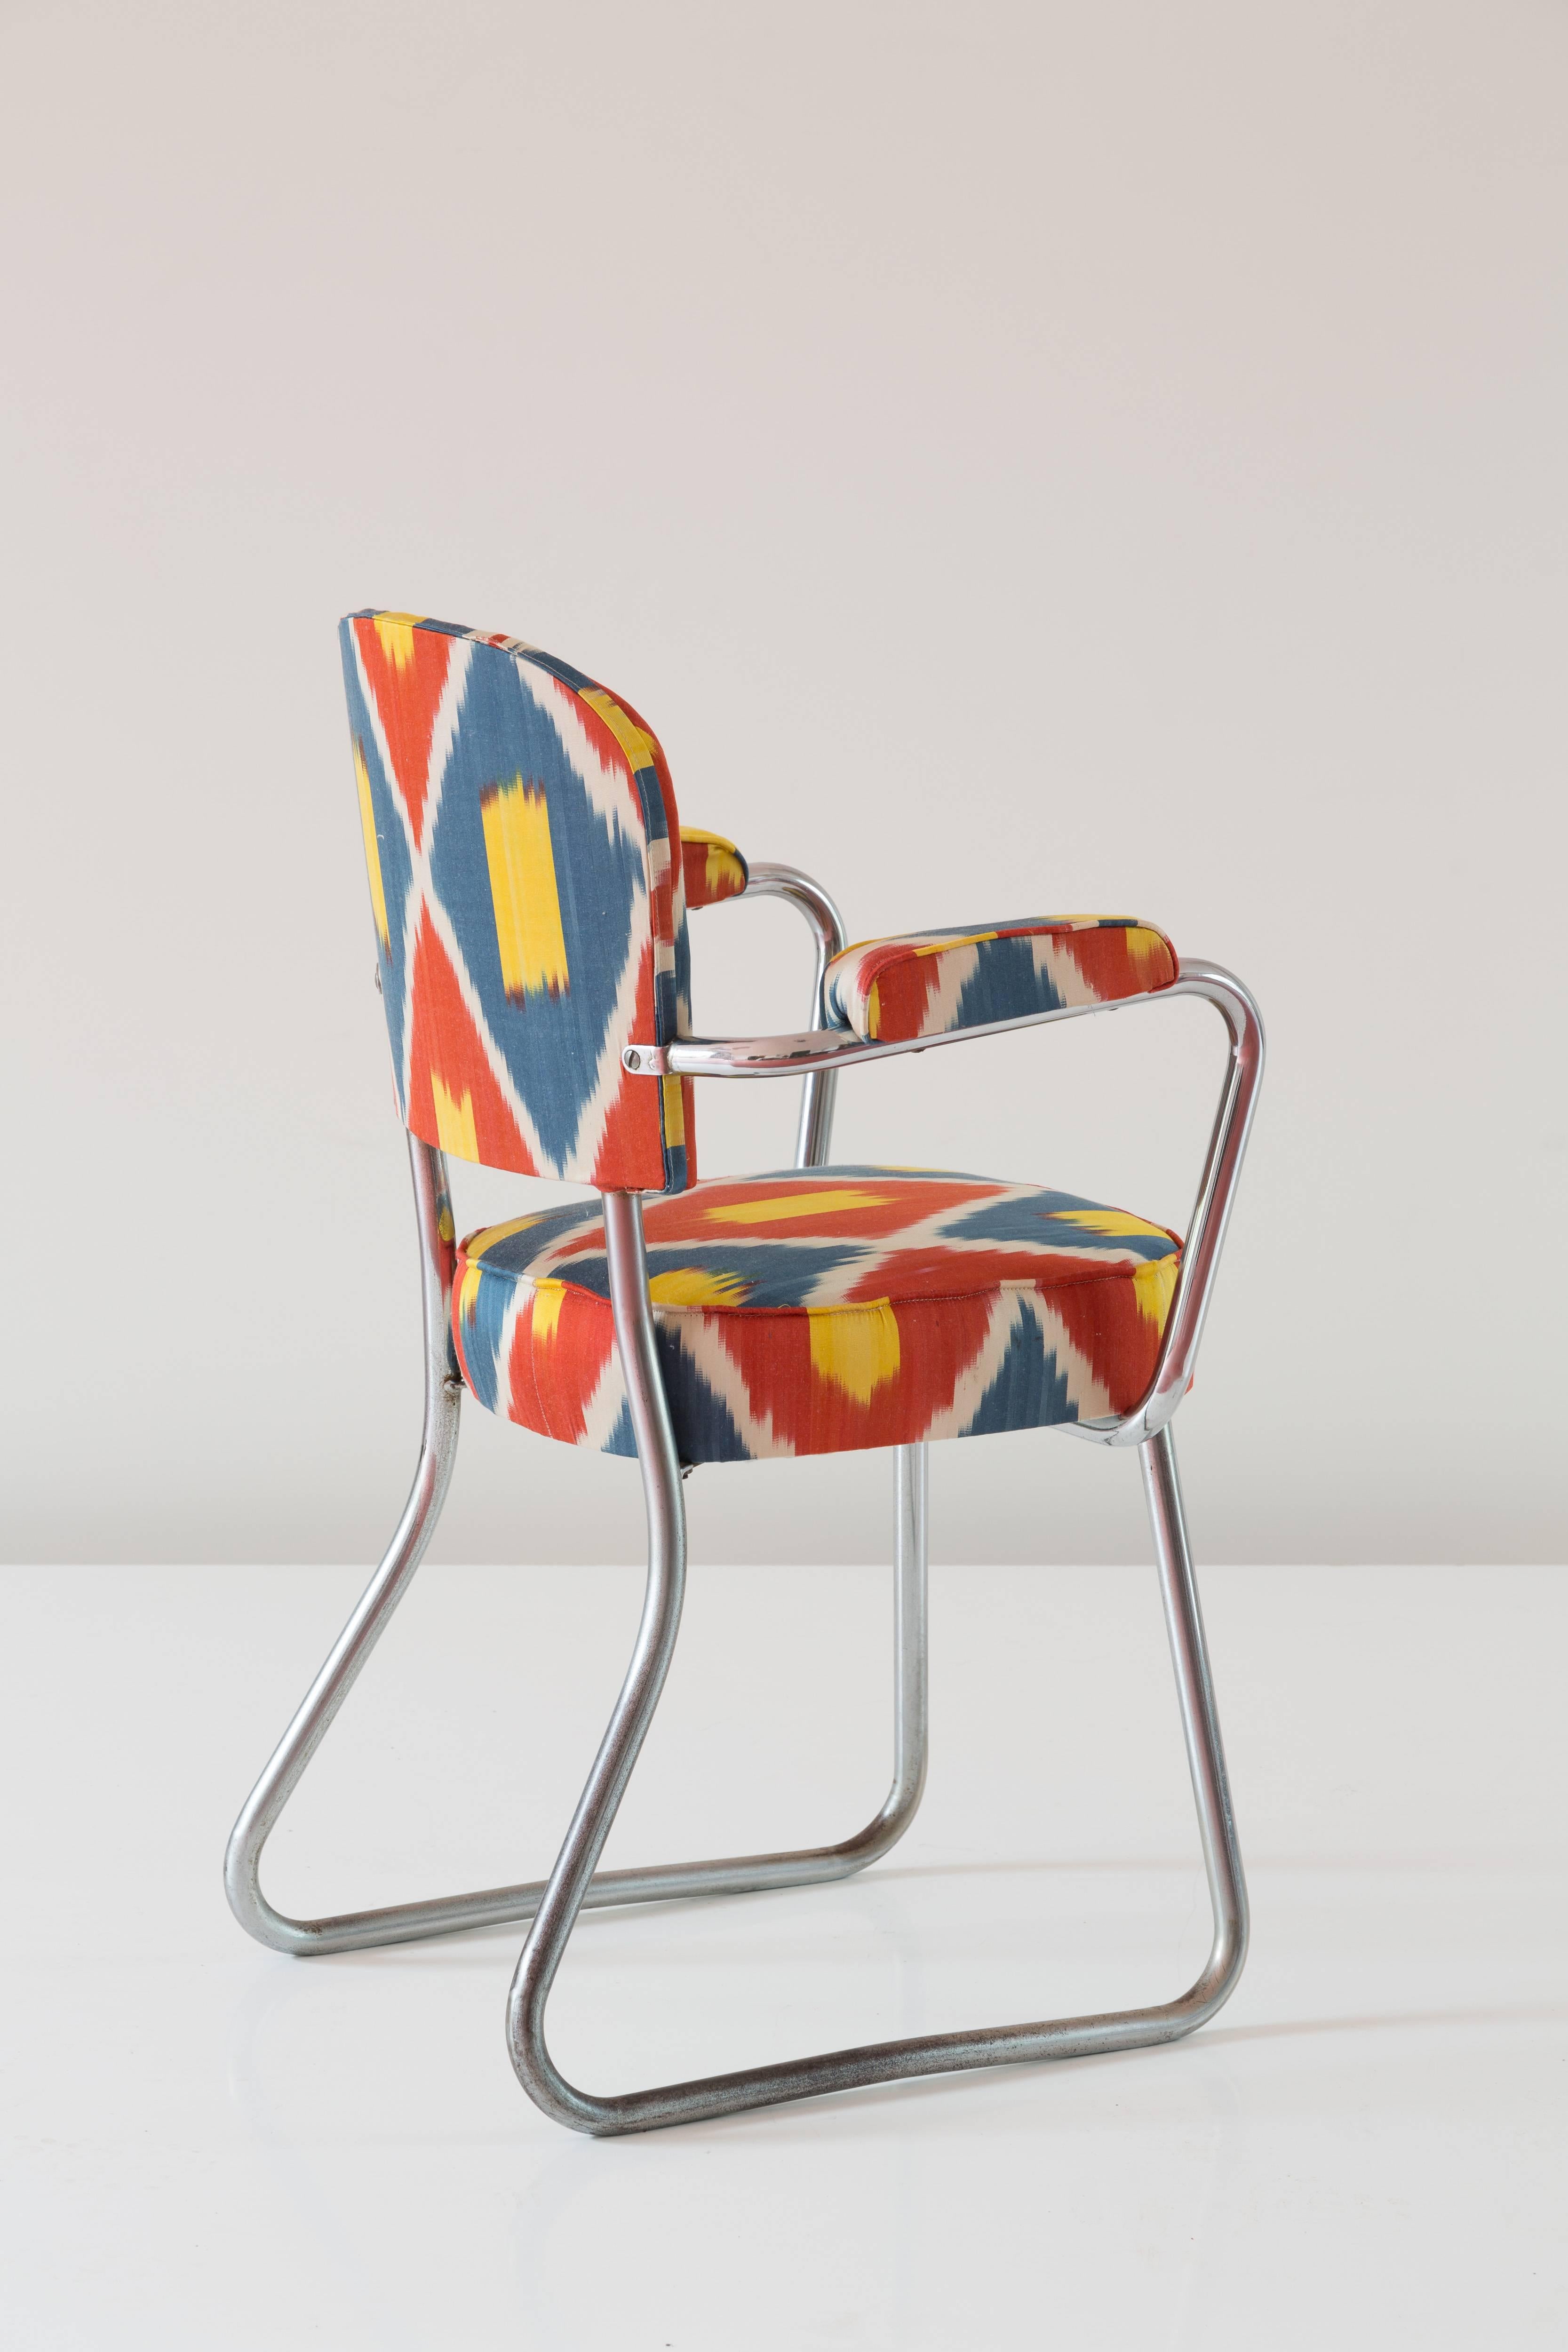 Iconic armchair designed by Gio Ponti in 1936
from Uffici of Palazzo Montecatini, Milano 
produced by Ditta Parma Antonio & figli.
Aluminium, silk.
re-upholsterd in ikat antik turk silk.
Very good condition.
Measures: Height 83 cm 53 x 59